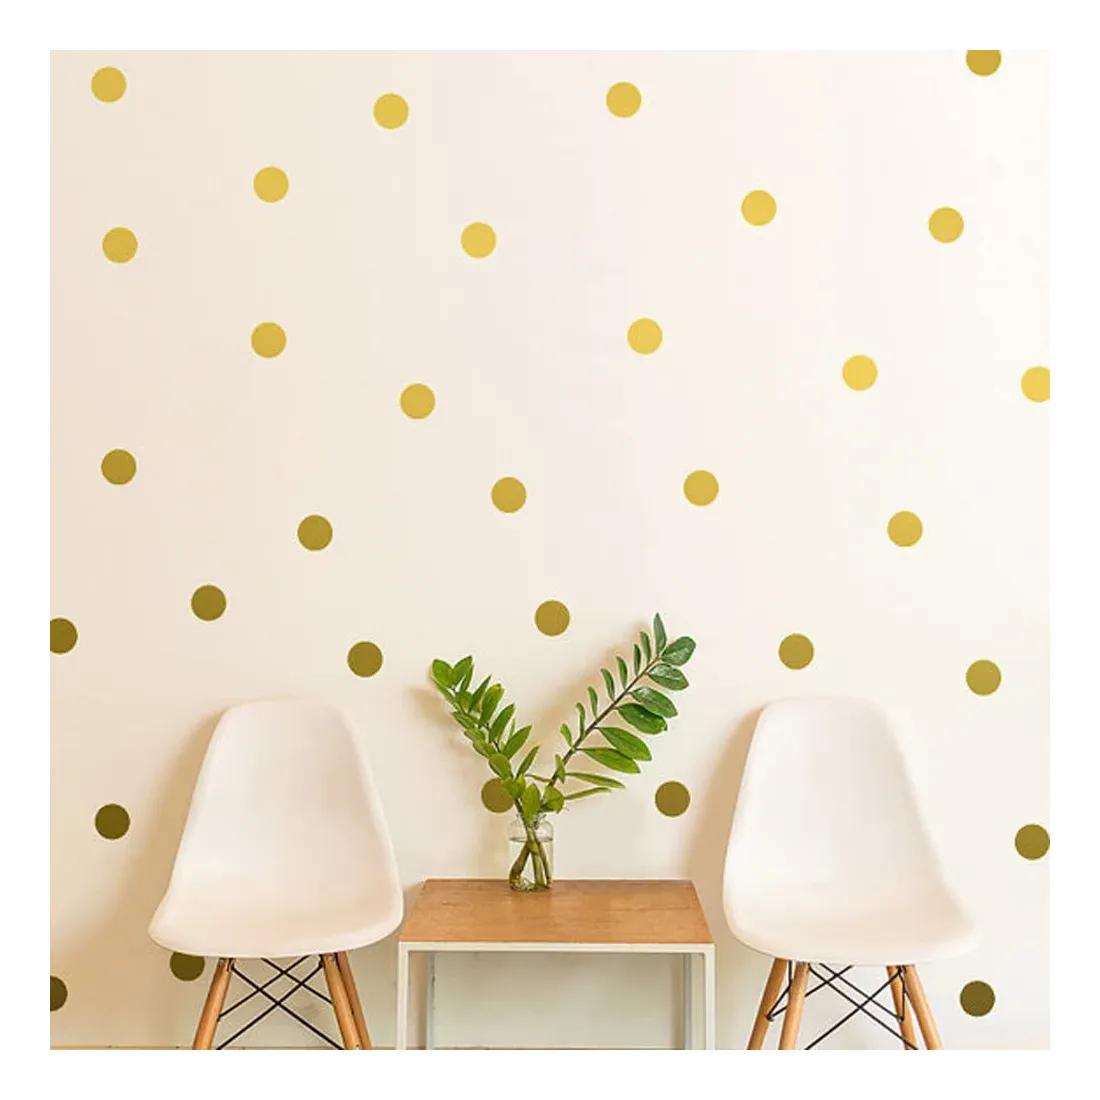 Custom Gold Dots Wall Decals 200 Dots 5 cm Posh Polka Removable Sticker for Children Bedroom Playroom Nursery Decoration